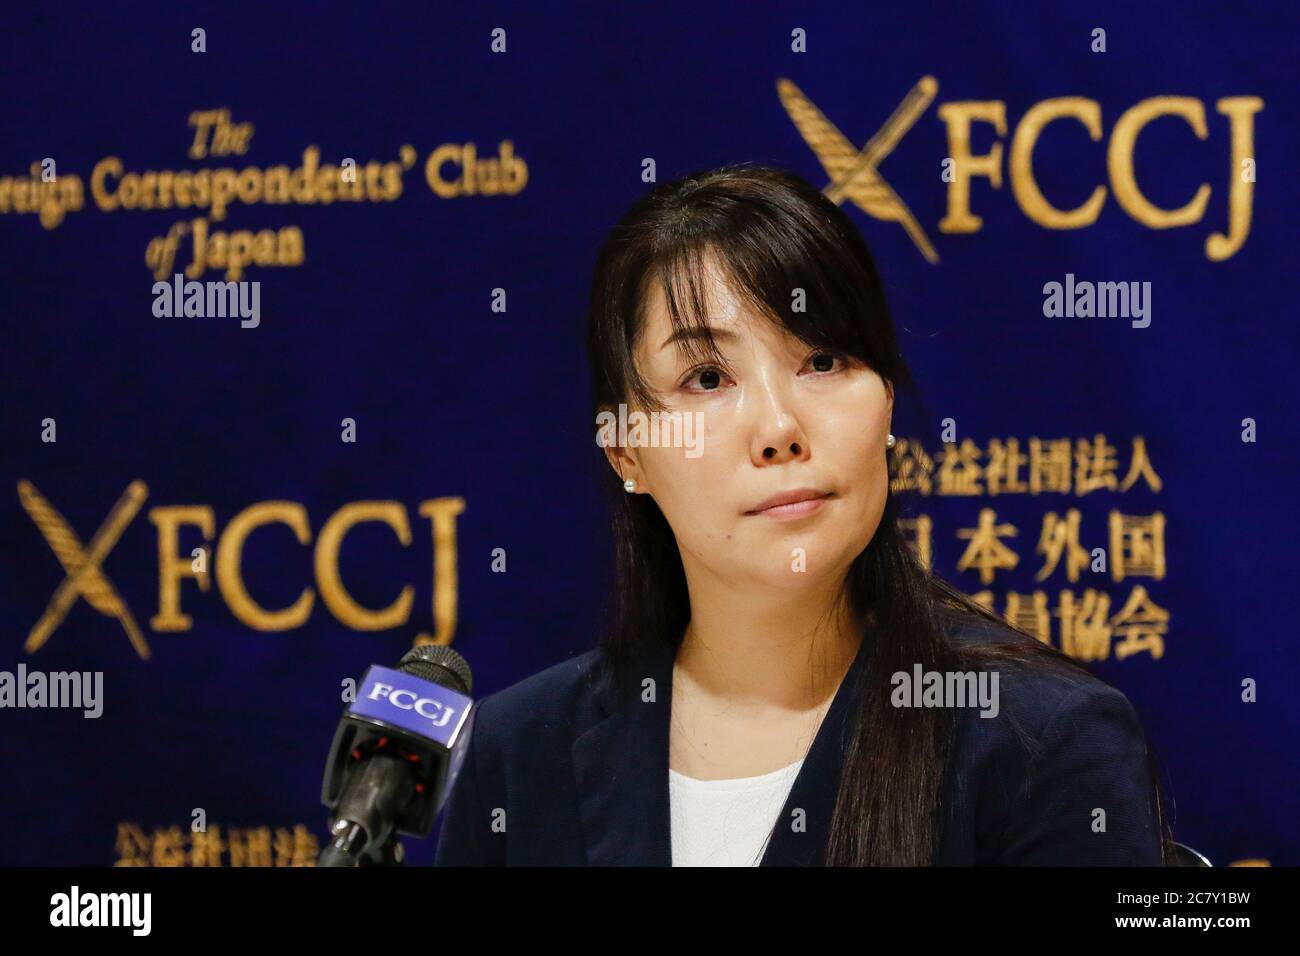 Kaori Kohga head of the Nightlife Business Association attends a news conference at The Foreign Correspondents' Club of Japan (FCCJ) on July 20, 2020, Tokyo, Japan. Kohga, who is representing hostess workers and clubs across Japan, came to the Club alongside Dr. Shinya Iwamuro to talk about the challenges of nightlife workers amid coronavirus pandemic, in which recent infection cases have been rises among people in their 20s and 30s. Credit: Rodrigo Reyes Marin/AFLO/Alamy Live News Stock Photo